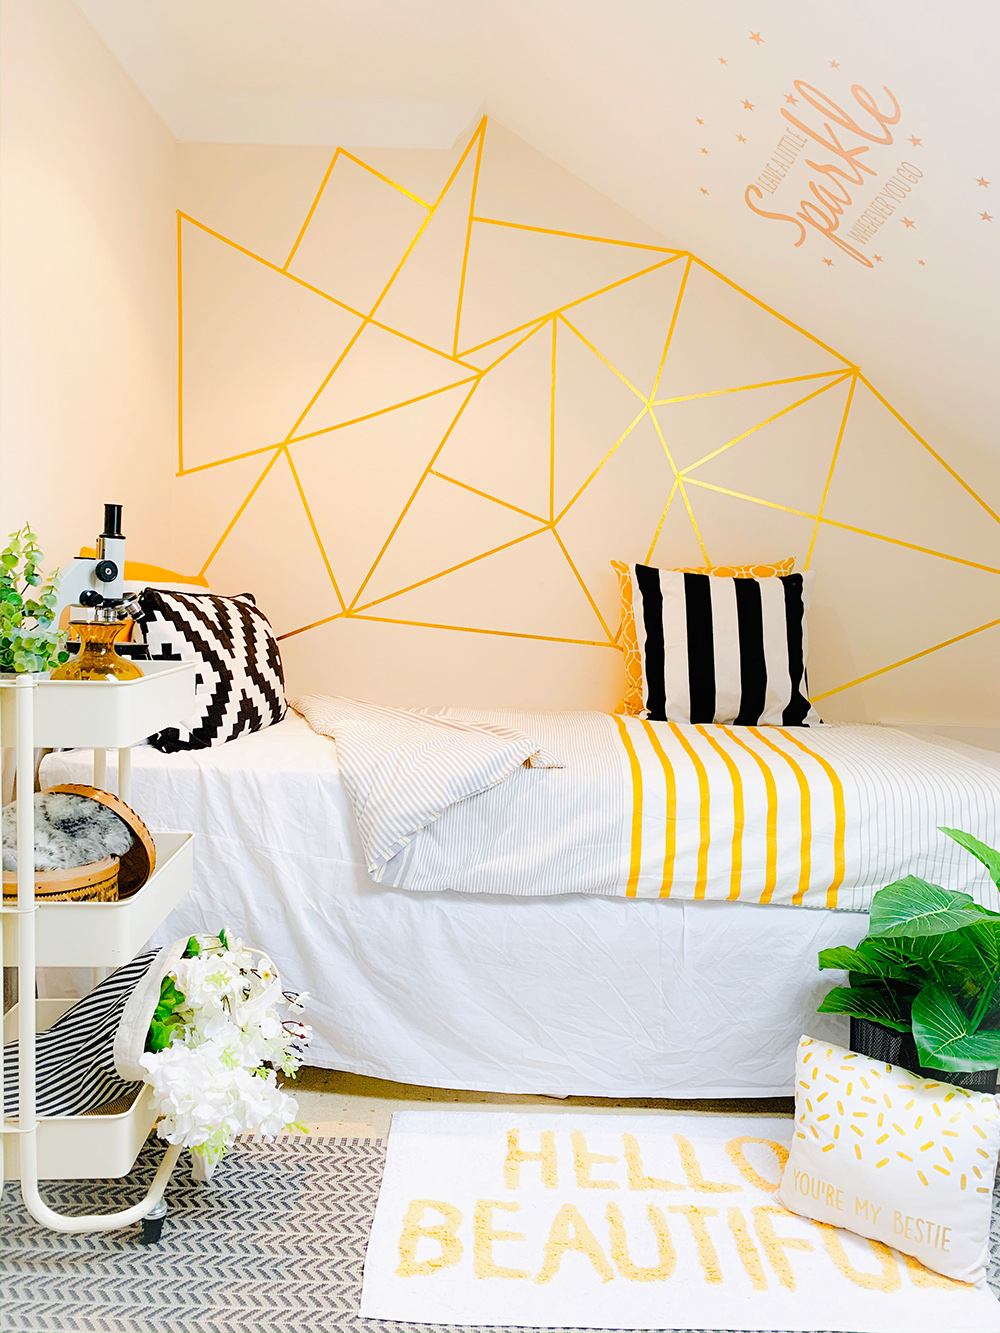 Black, white and yellow bedroom inspiration